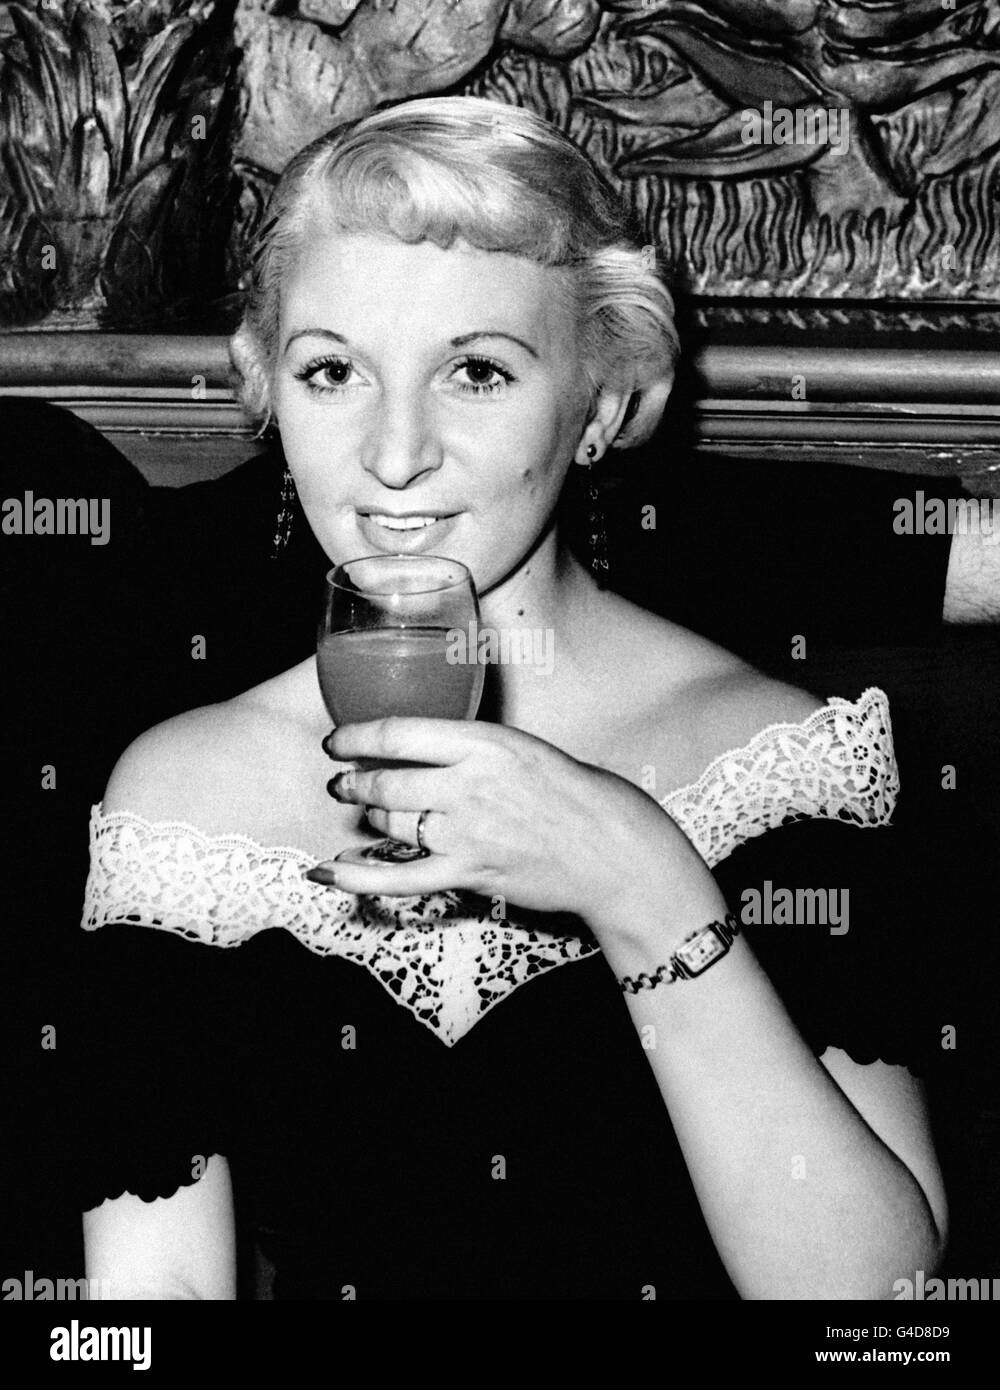 Ruth Ellis, who was hanged at Holloway Prison on 13th July 1955, for killing her lover, racing driver David Blakely. She was the last woman to be hanged in Britain. Stock Photo